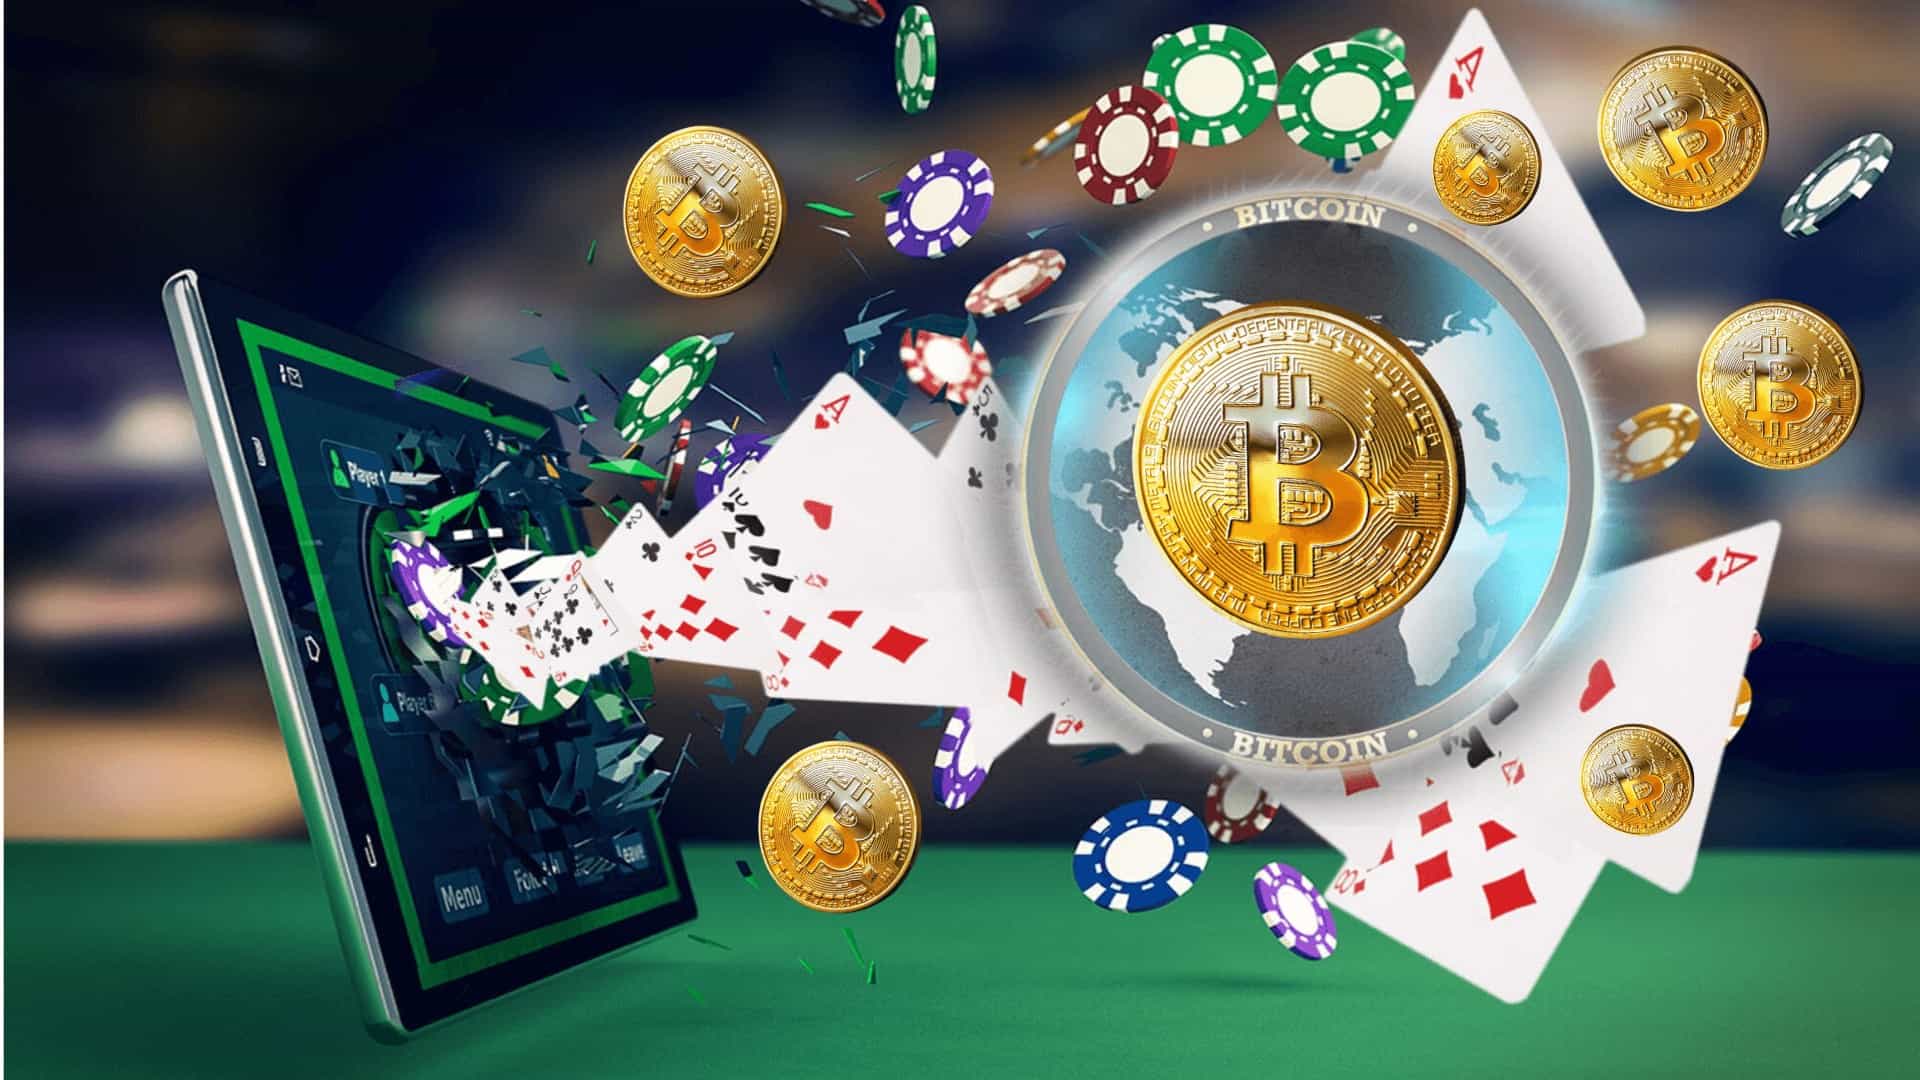 Why Some People Almost Always Save Money With bitcoin casinos